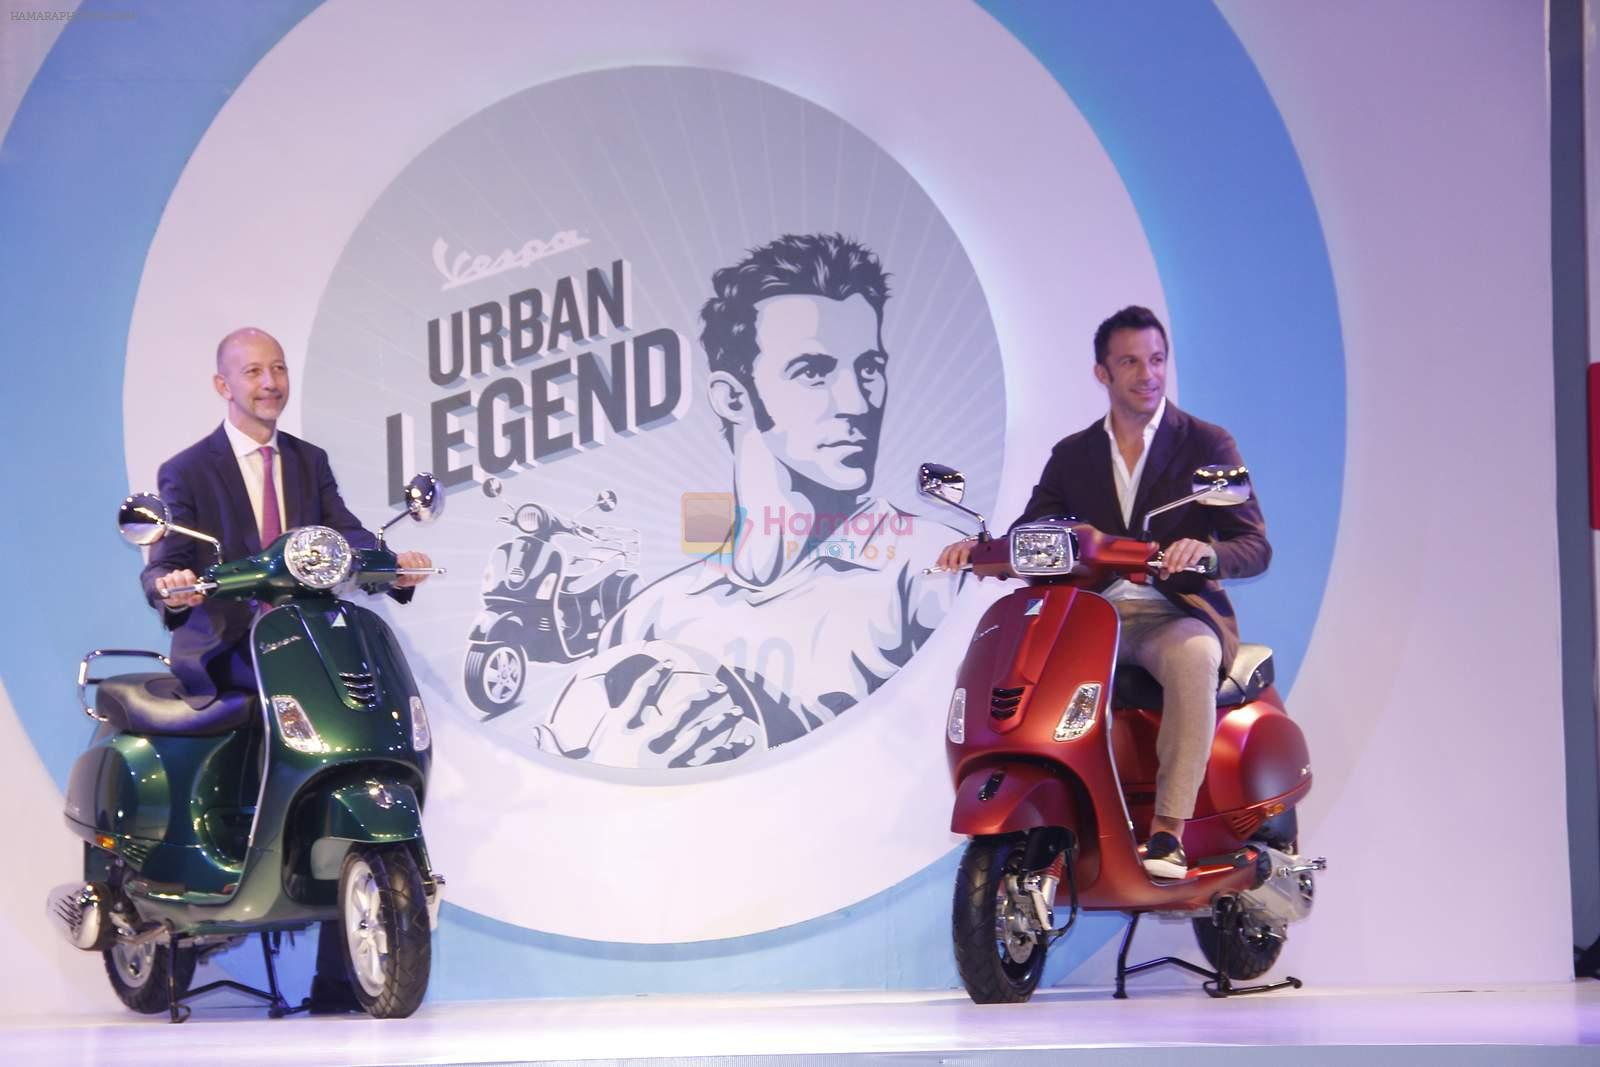 at Vespa press meet to welcome legendary soccer player Allesandro Del Pierro in Mumbai on 1st Sept 2015